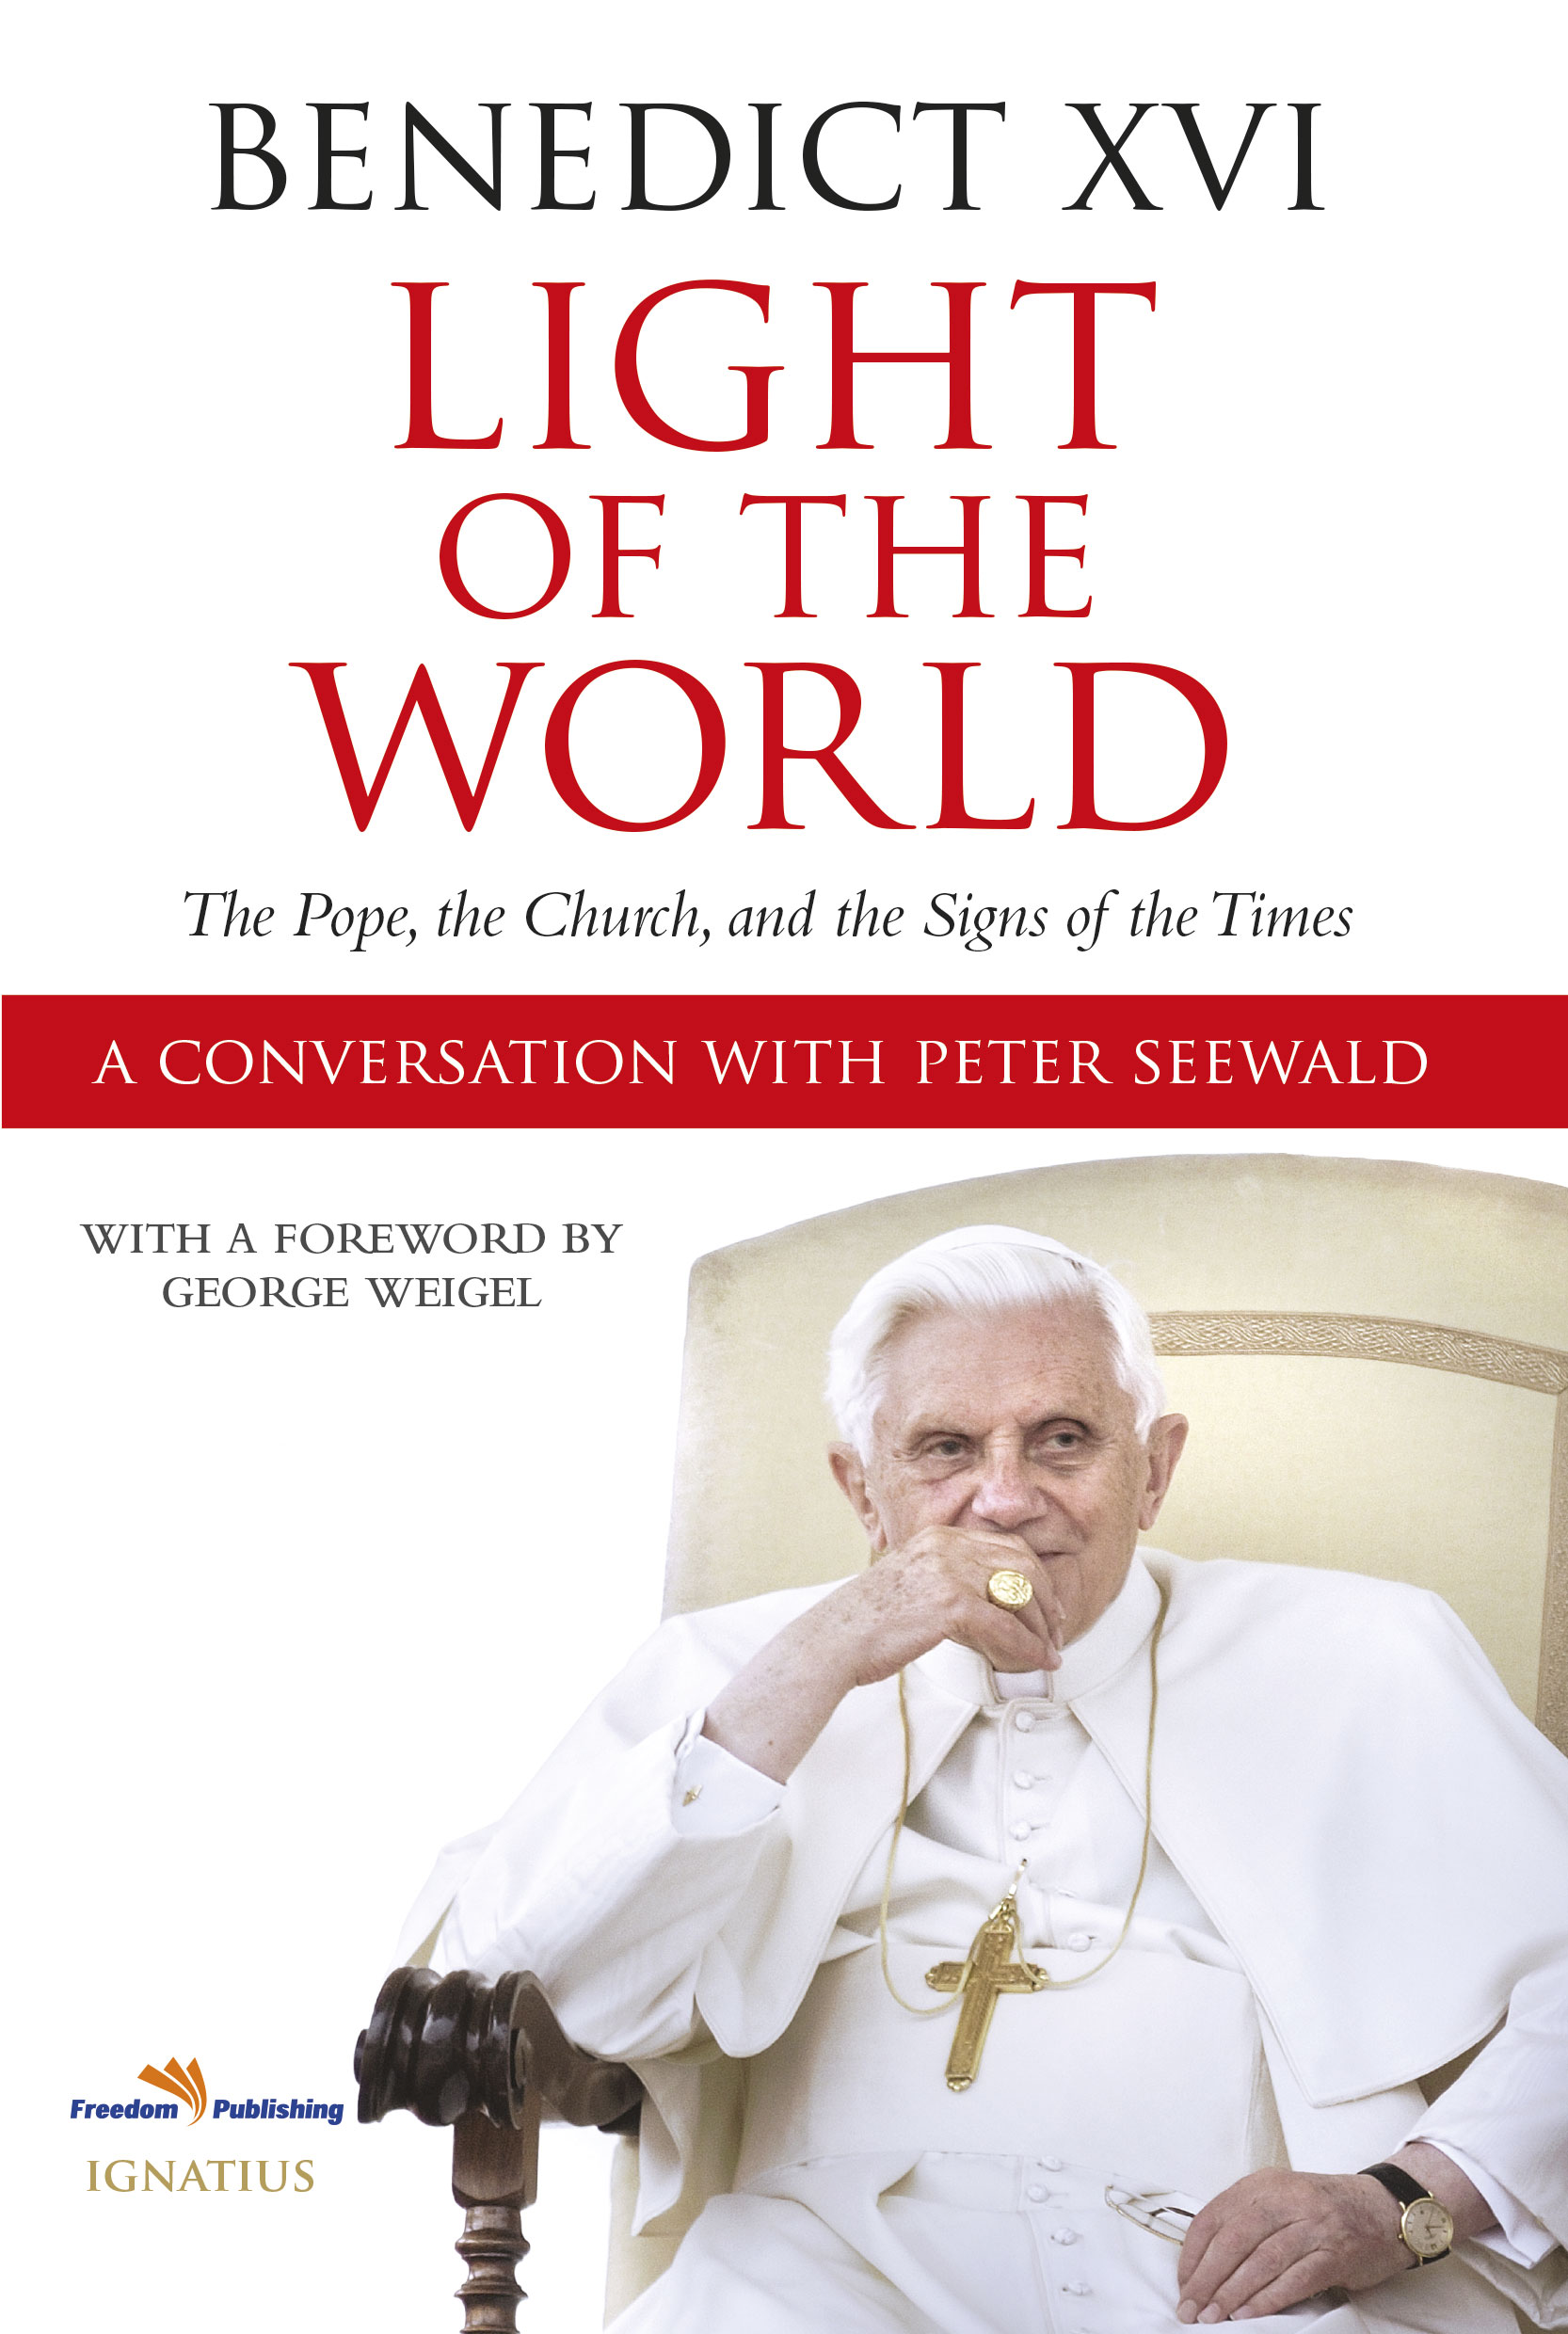 Light of the World: the Pope, the Church, and the Signs of the Times / Pope Benedict XVI: a Conversation with Peter Seewald (Hardback)